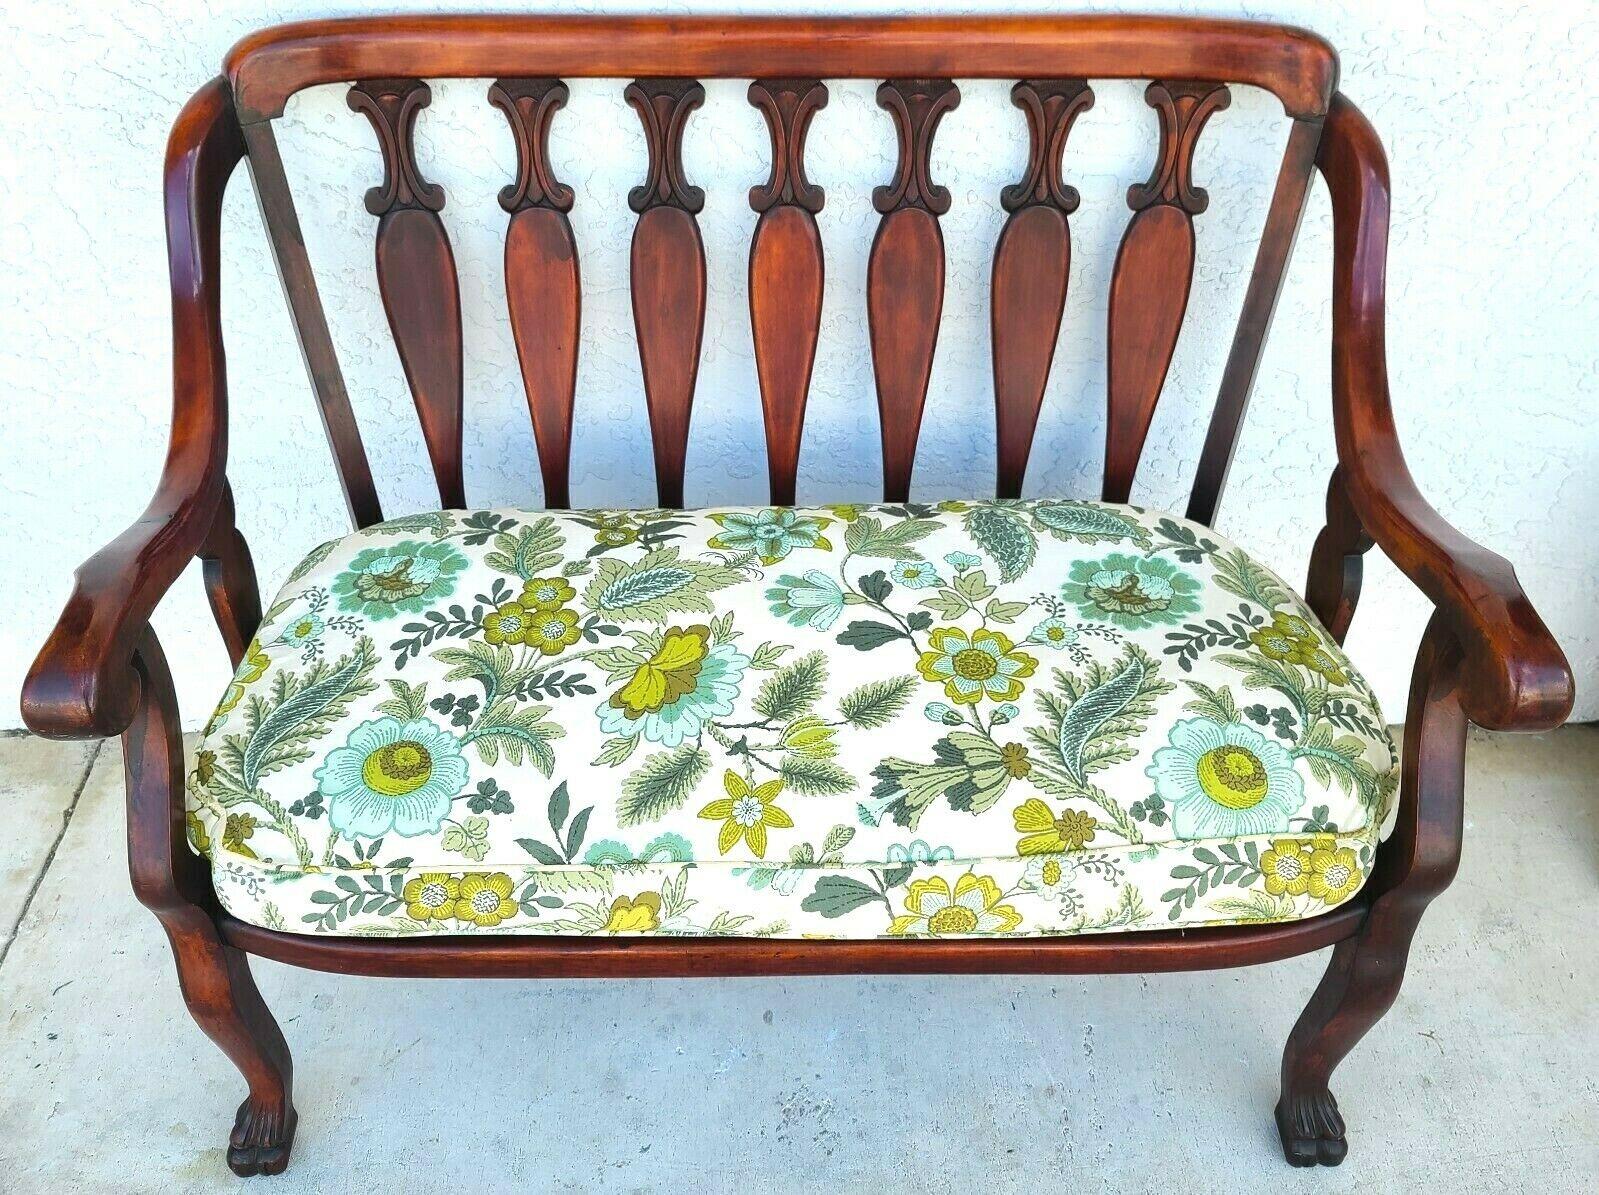 For FULL item description be sure to click on CONTINUE READING at the bottom of this listing.

Offering One Of Our Recent Palm Beach Estate Fine Furniture Acquisitions Of An 
Antique Early 1900s Solid Mahogany Claw Foot Settee Bench

Approximate